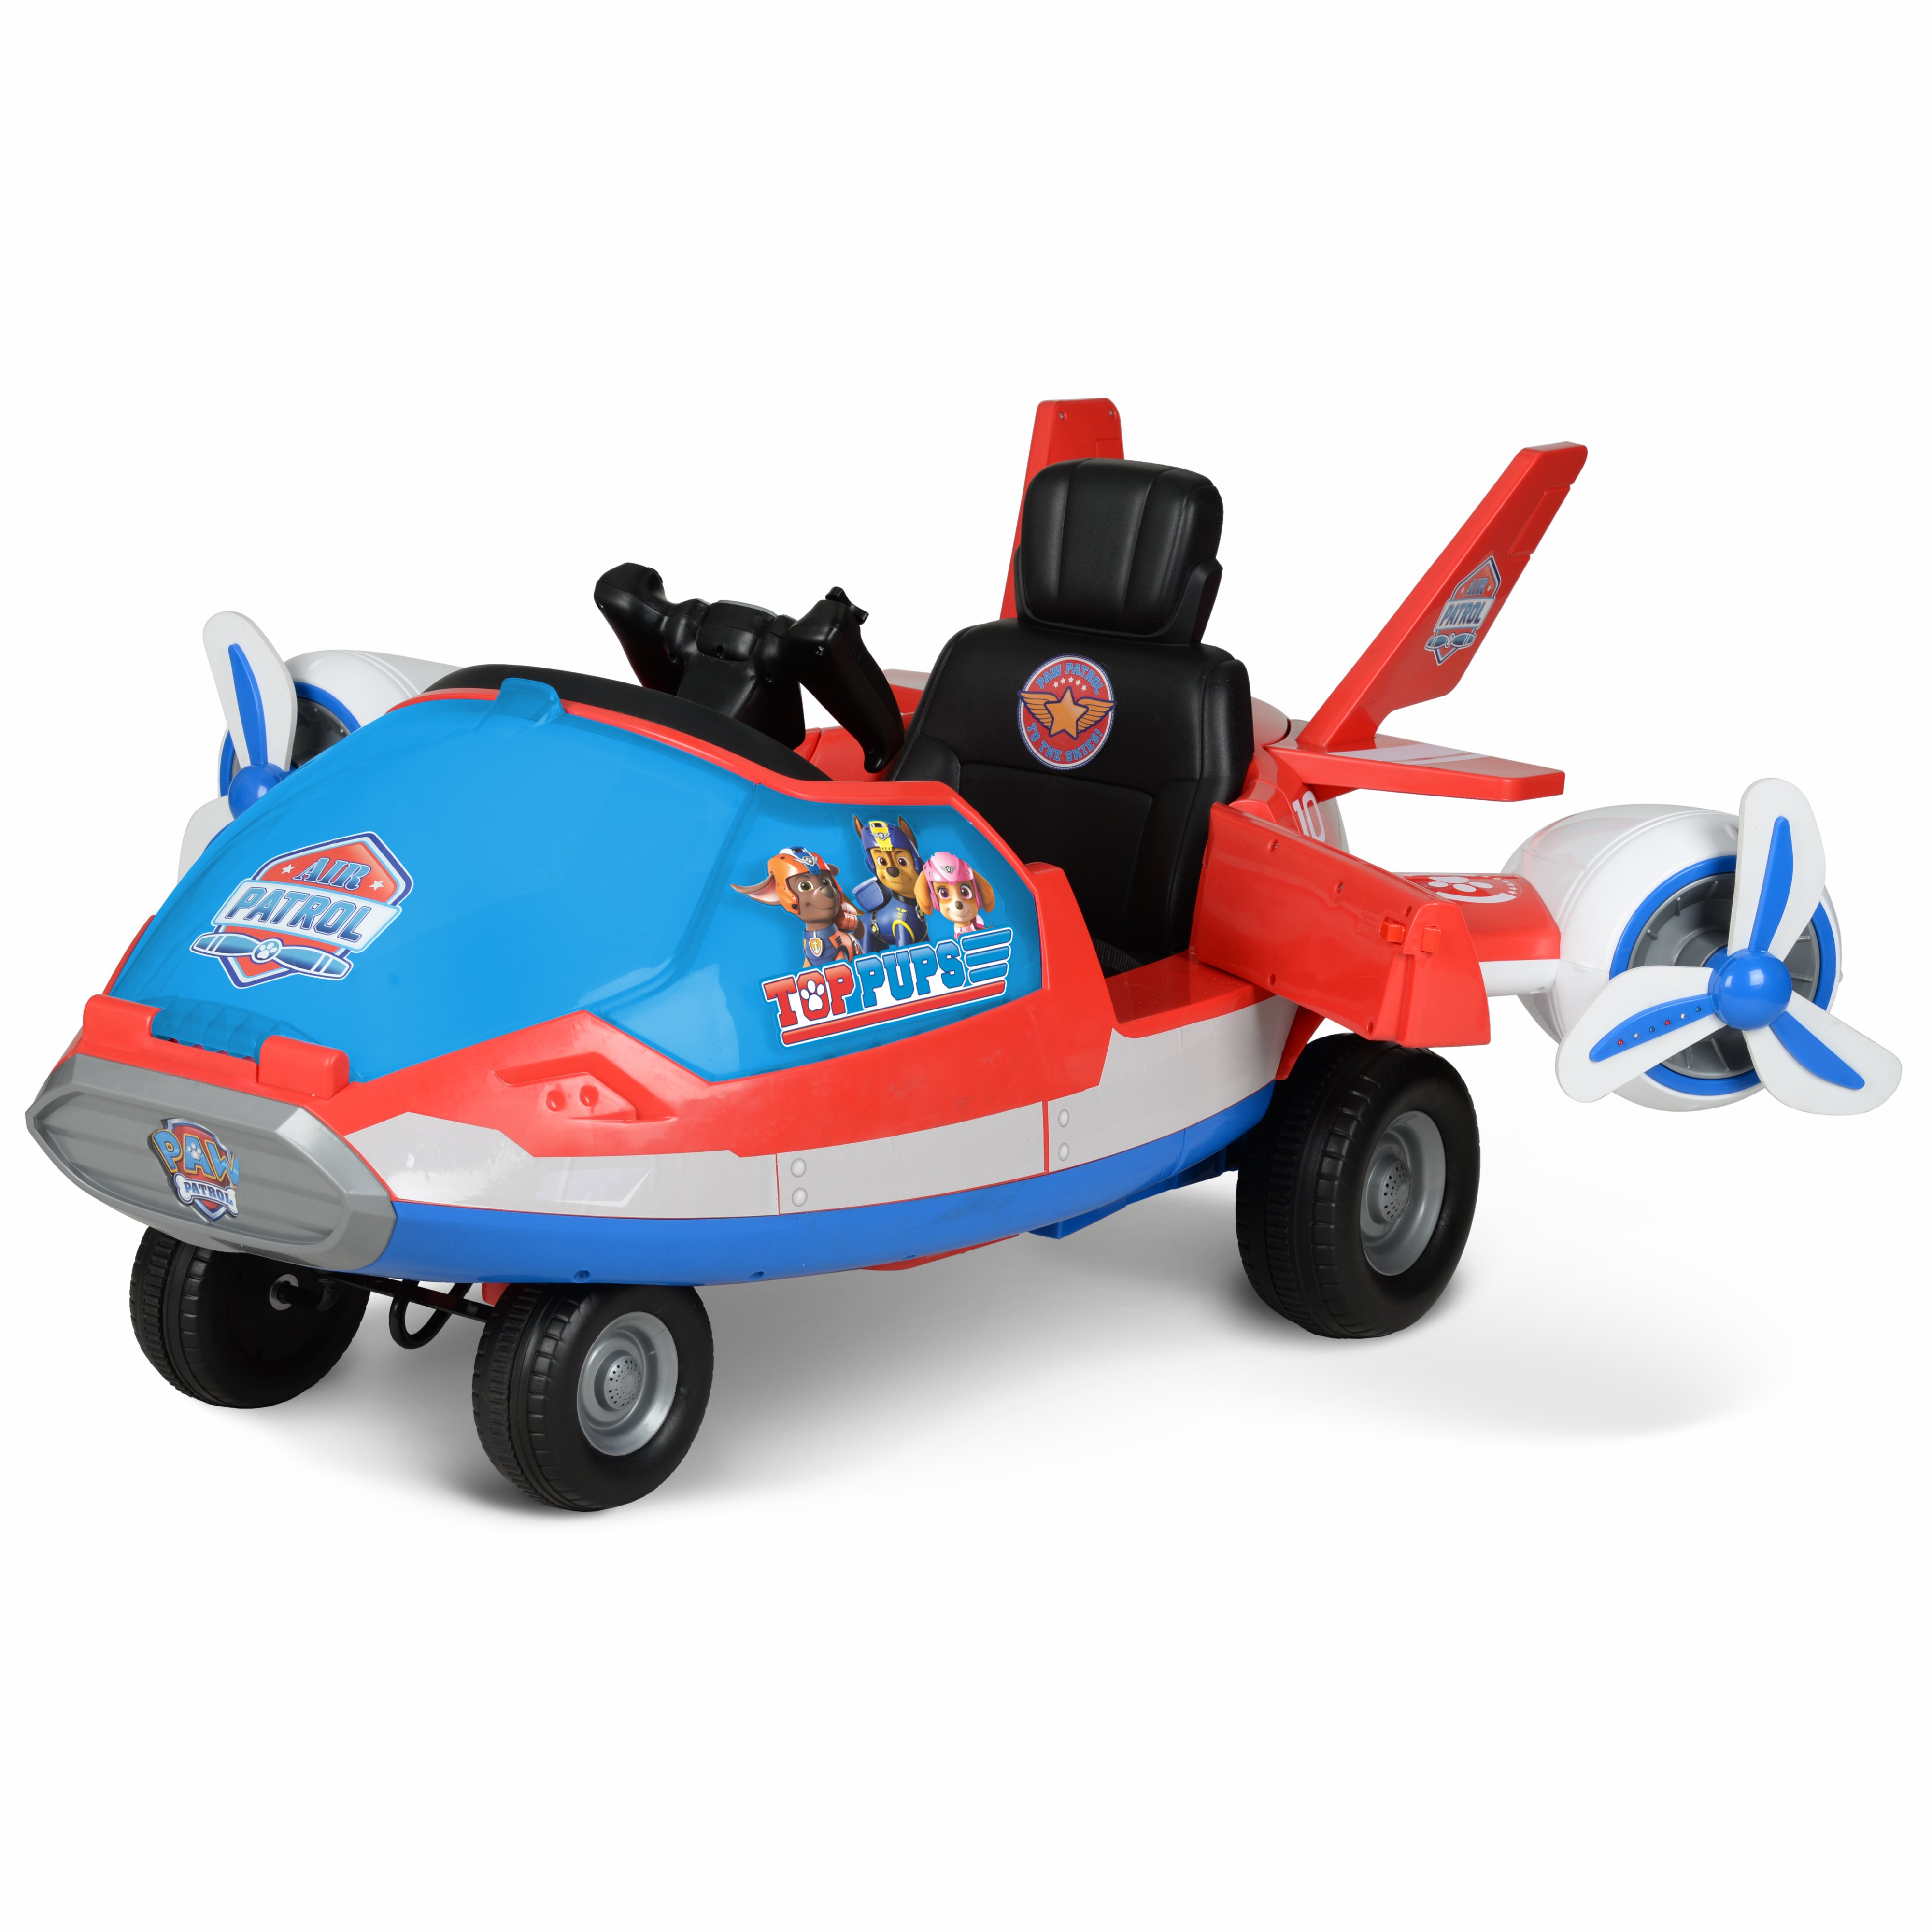 Nickelodeon 12 Volt Paw Patrol Airplane Battery Powered Ride On, for Ages 3 Years and up - image 3 of 11